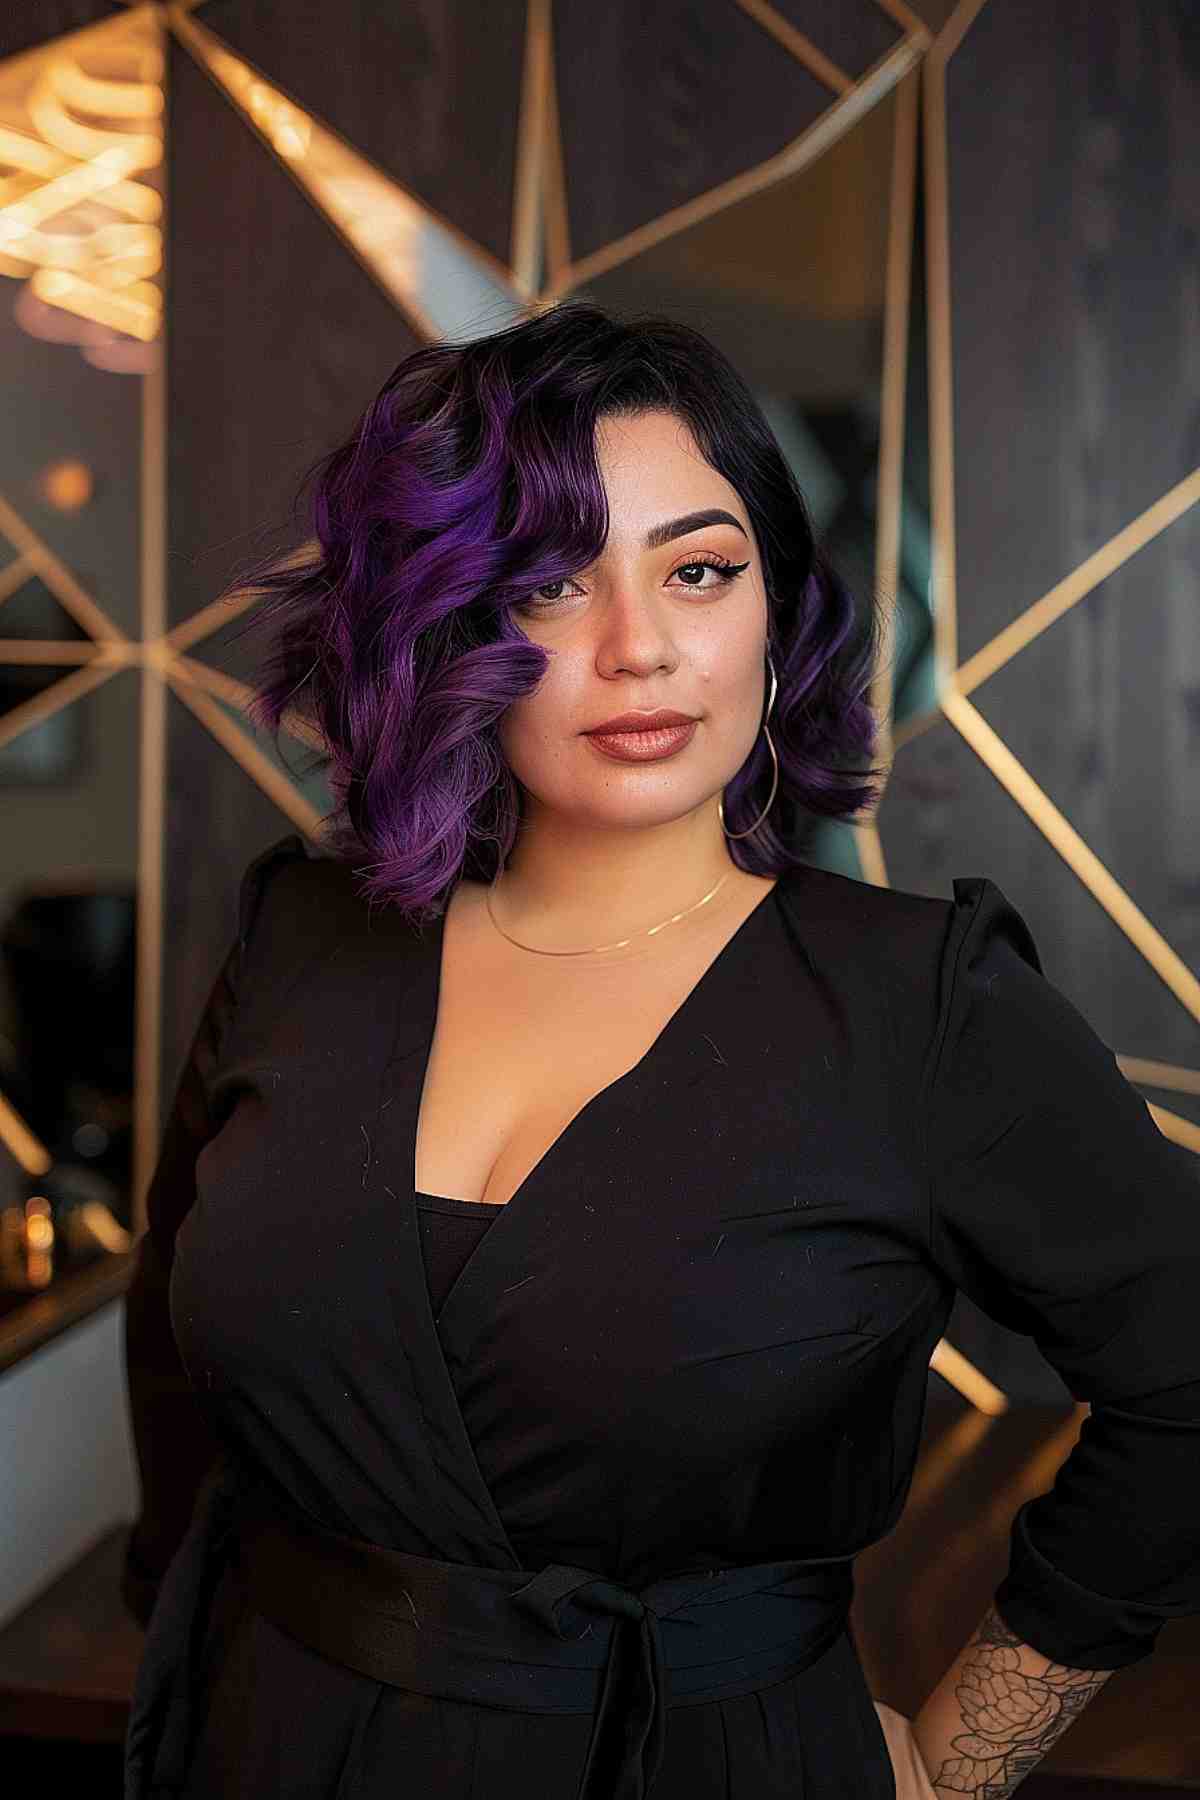 Stylish Woman with Asymmetrical Curly Hair and Purple Highlights